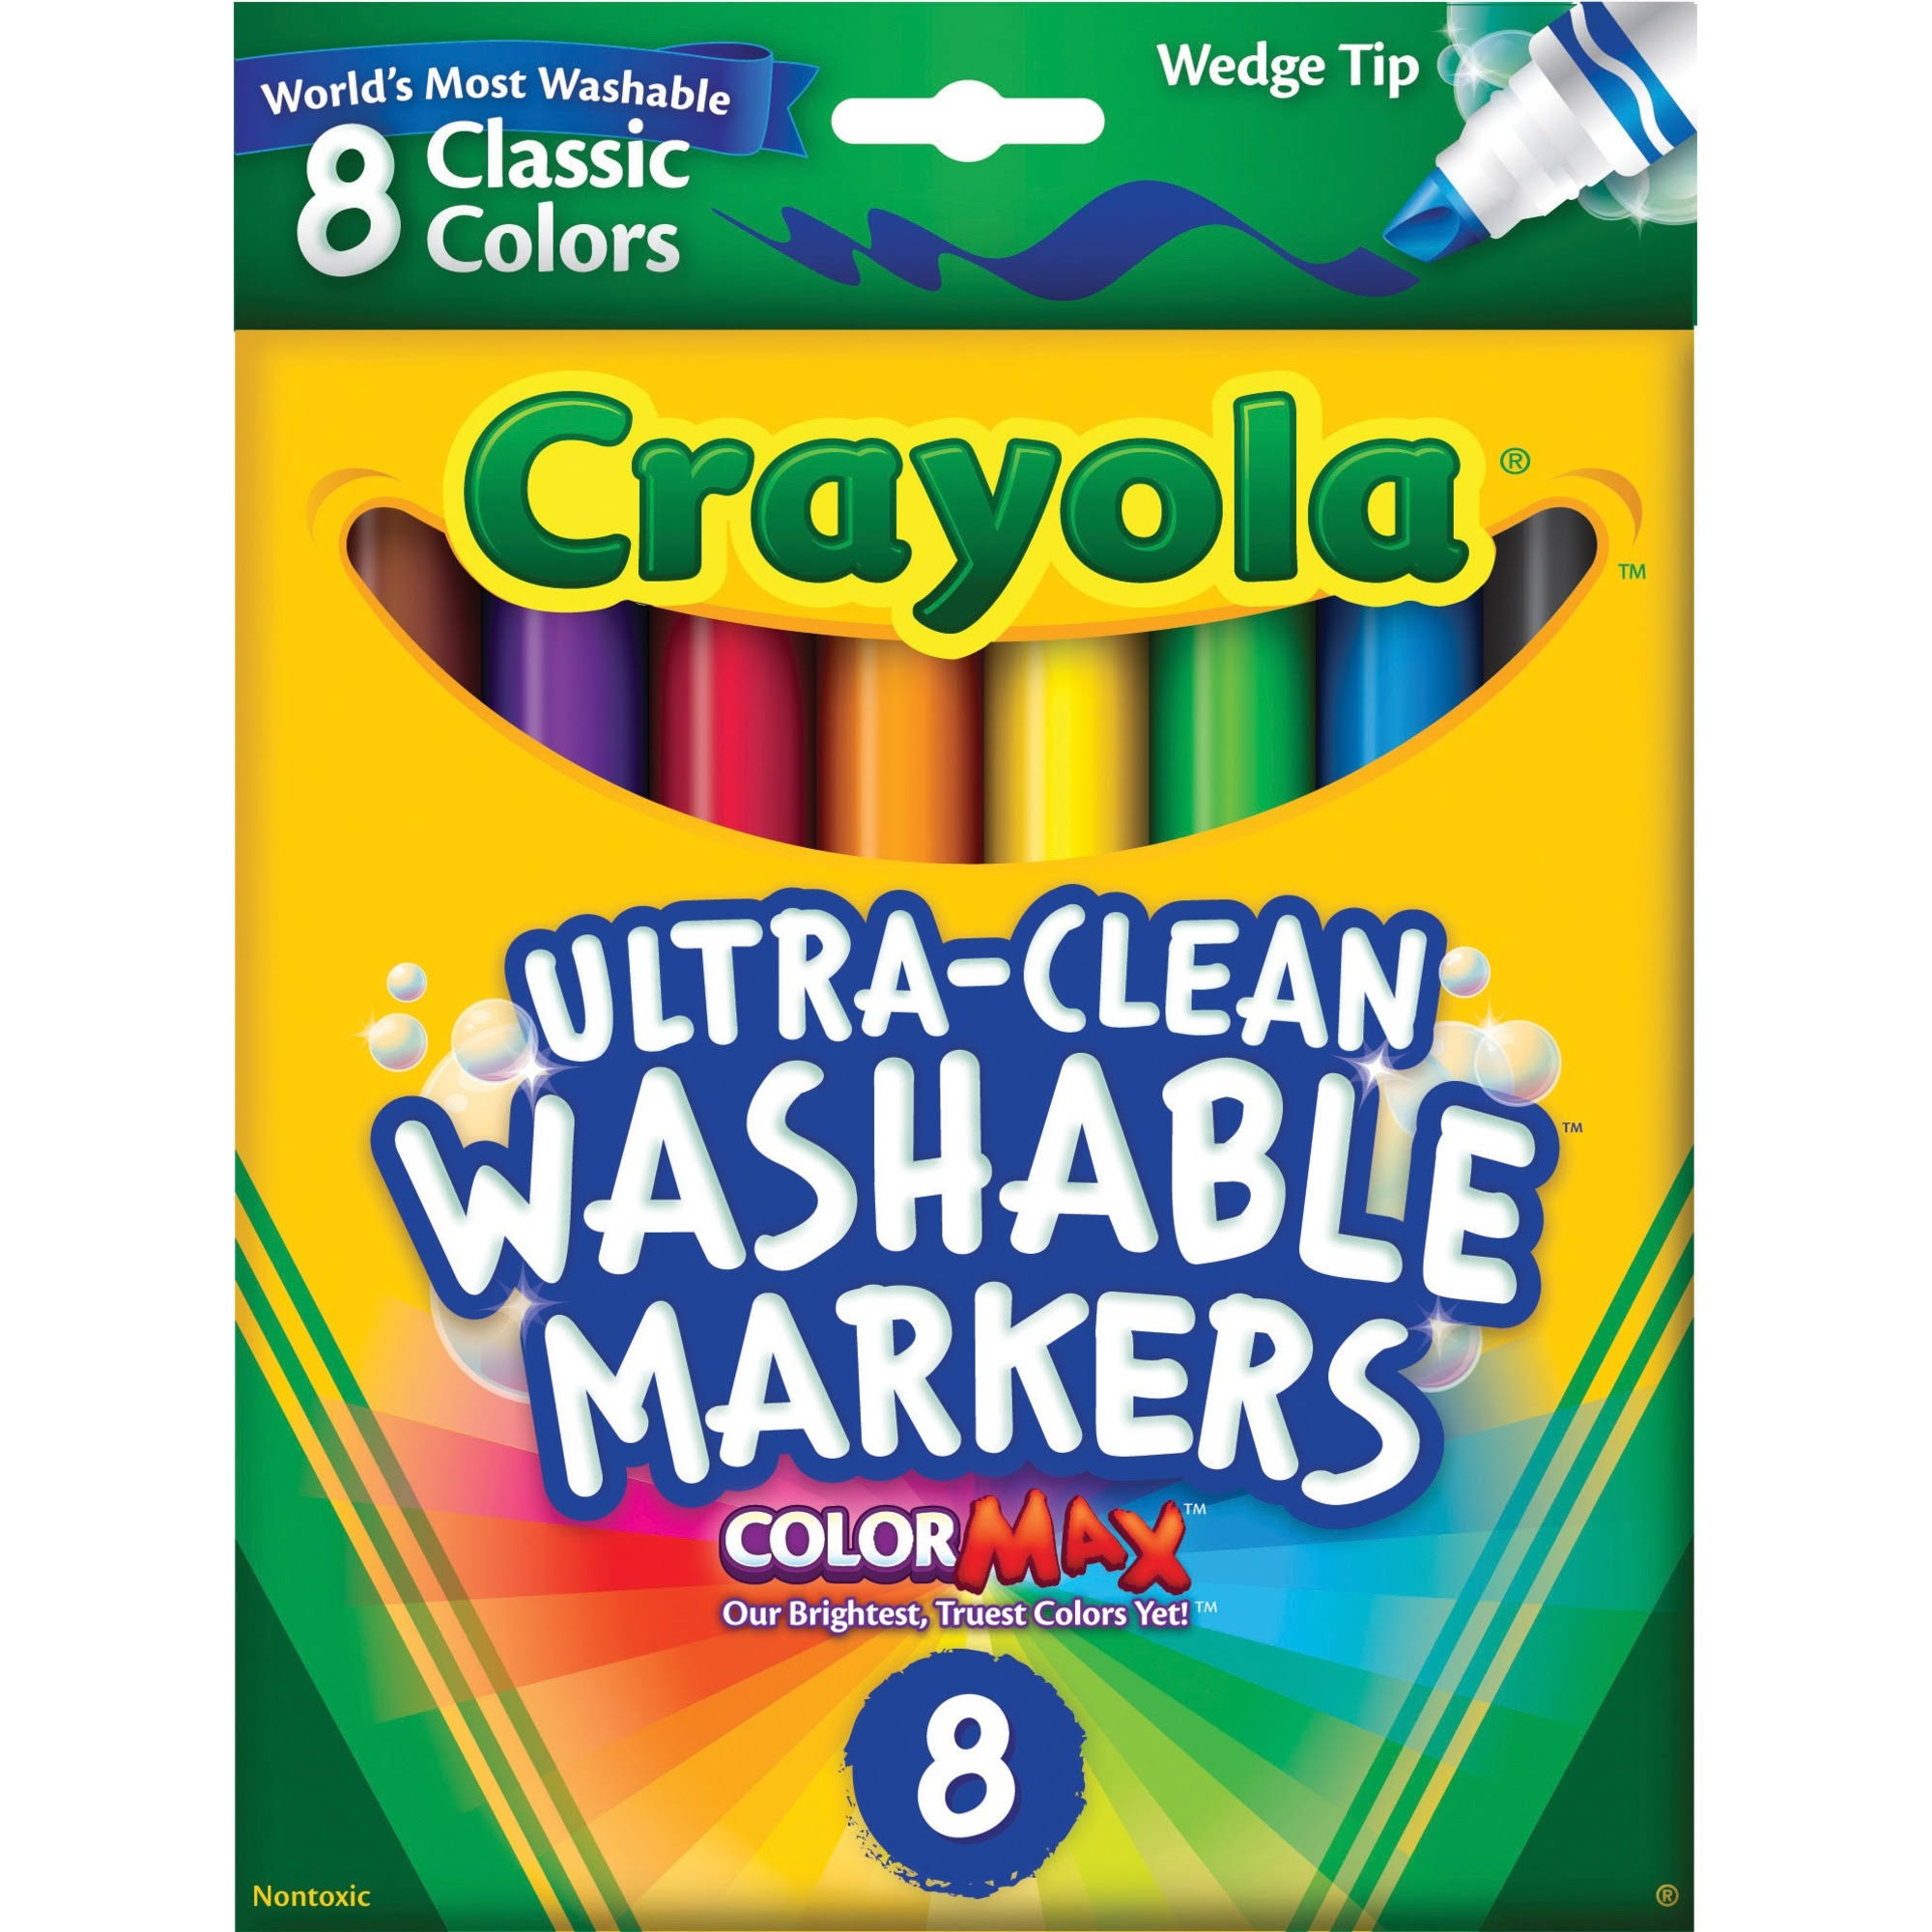 Crayola Washable Wedge Tip Markers - Assorted Colors, 8ct